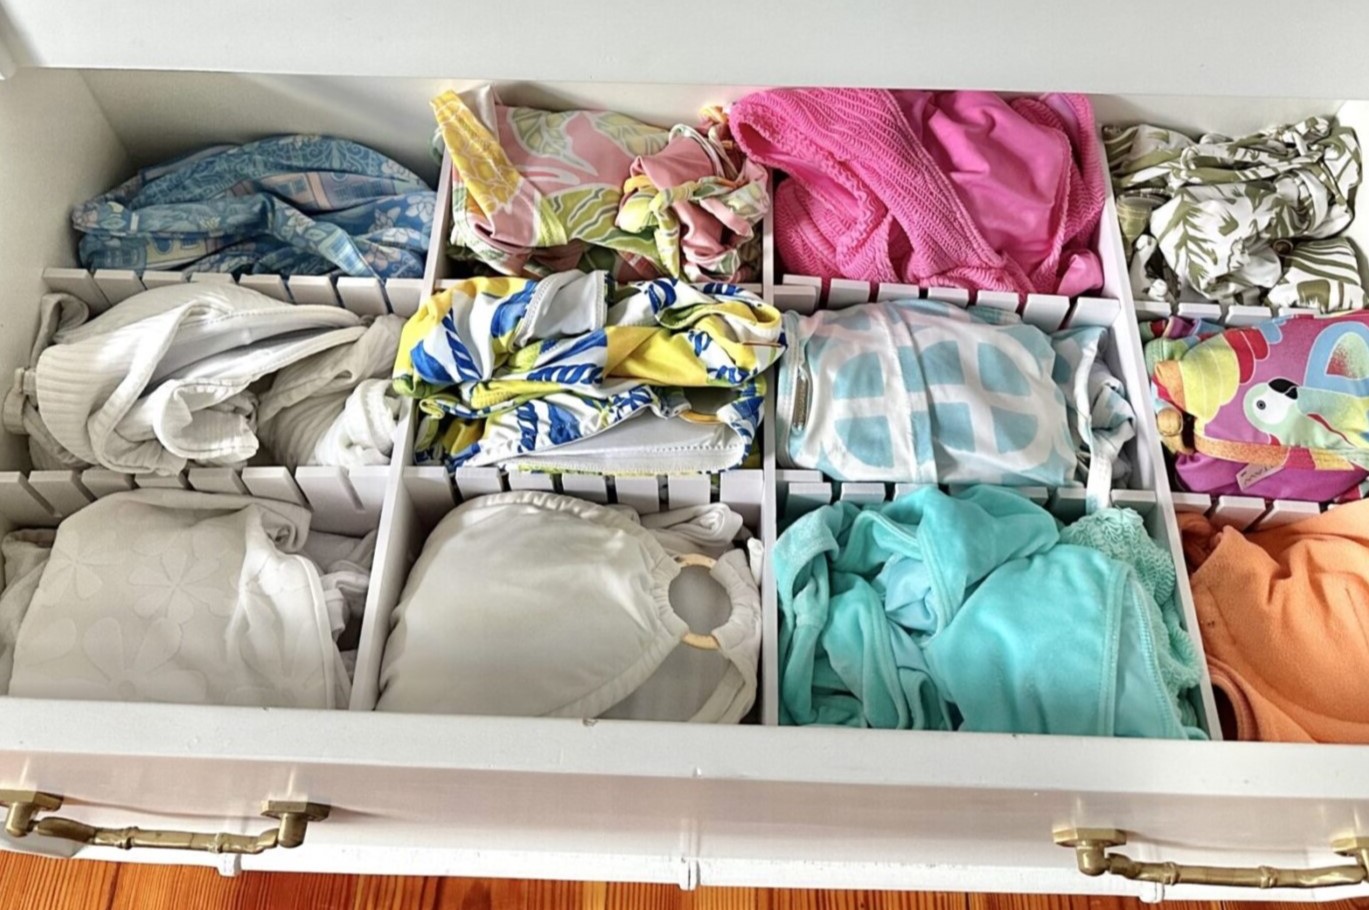 How To Organize Swimsuits